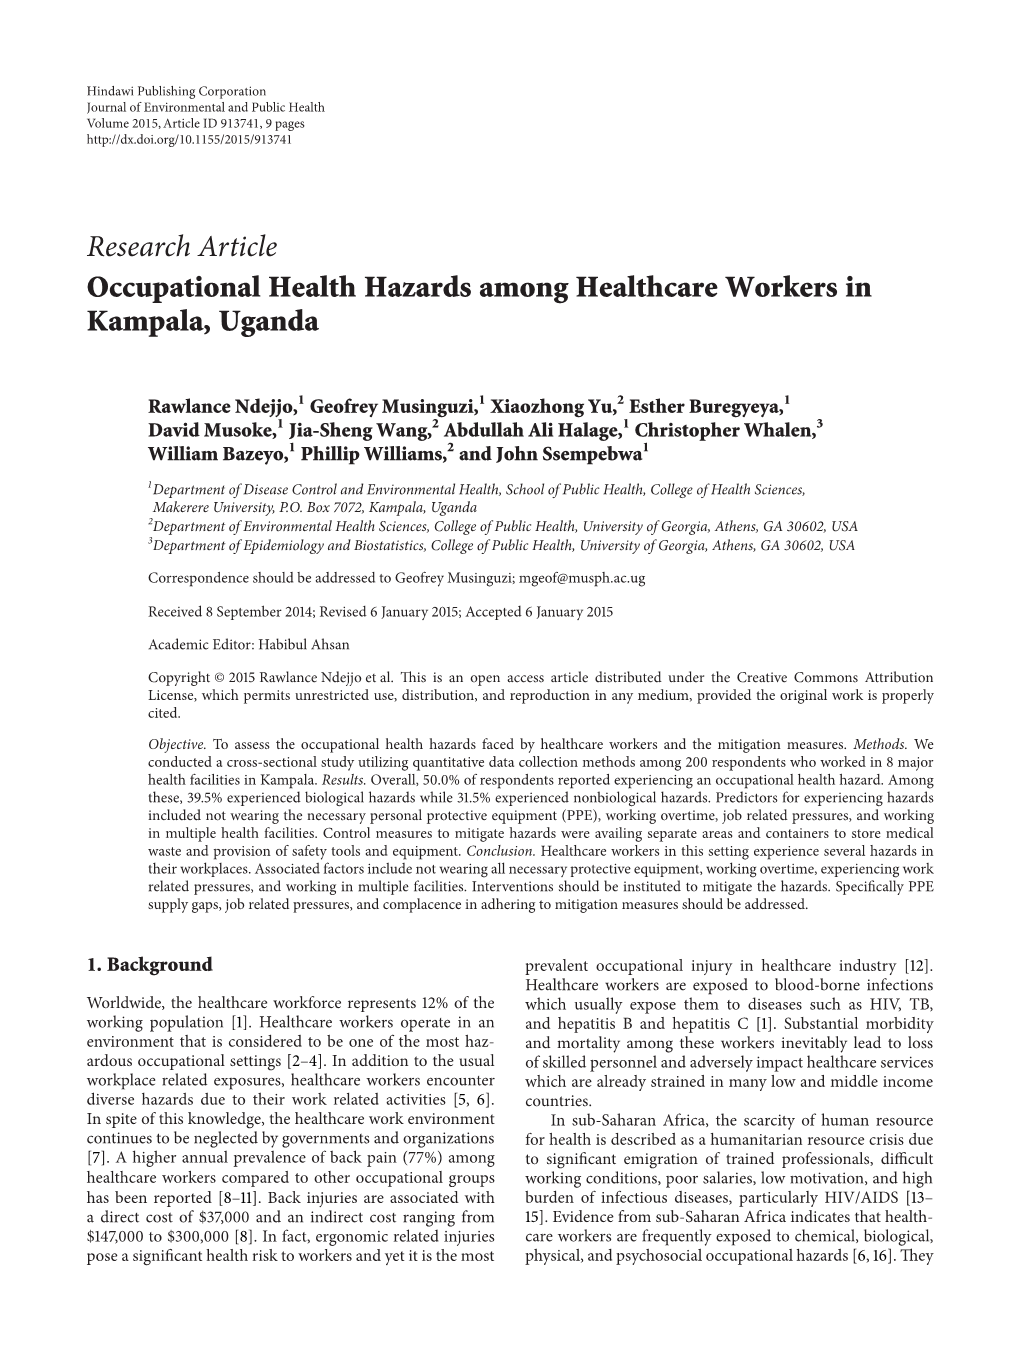 Research Article Occupational Health Hazards Among Healthcare Workers in Kampala, Uganda